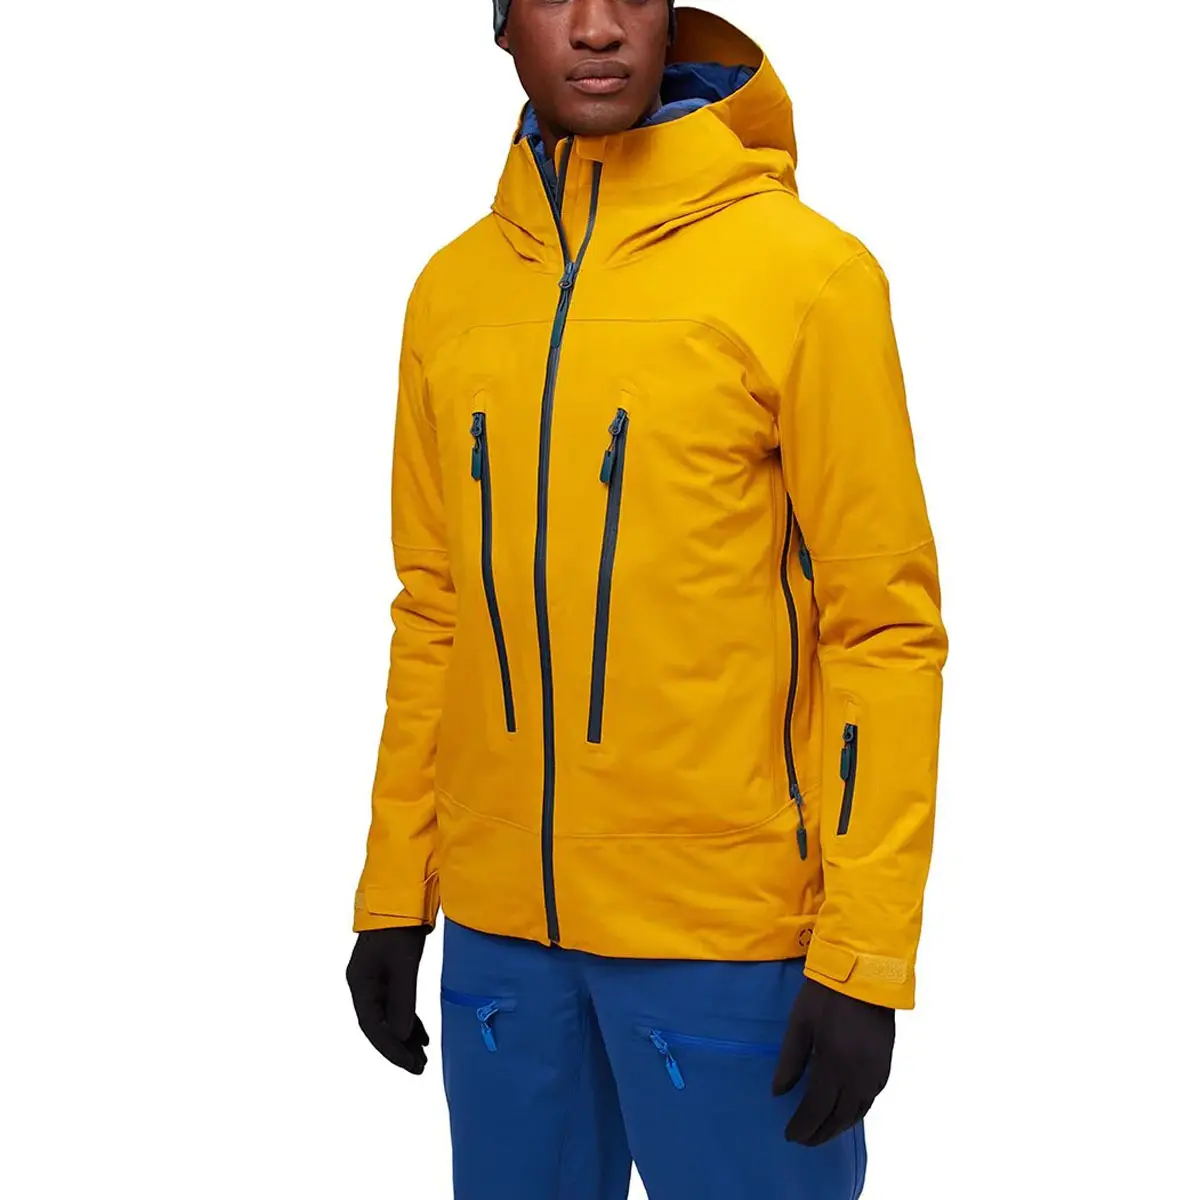 High end men's ultralight ski jackets breathable waterproof snowboard jackets with adjustable hood winter stretchy coats